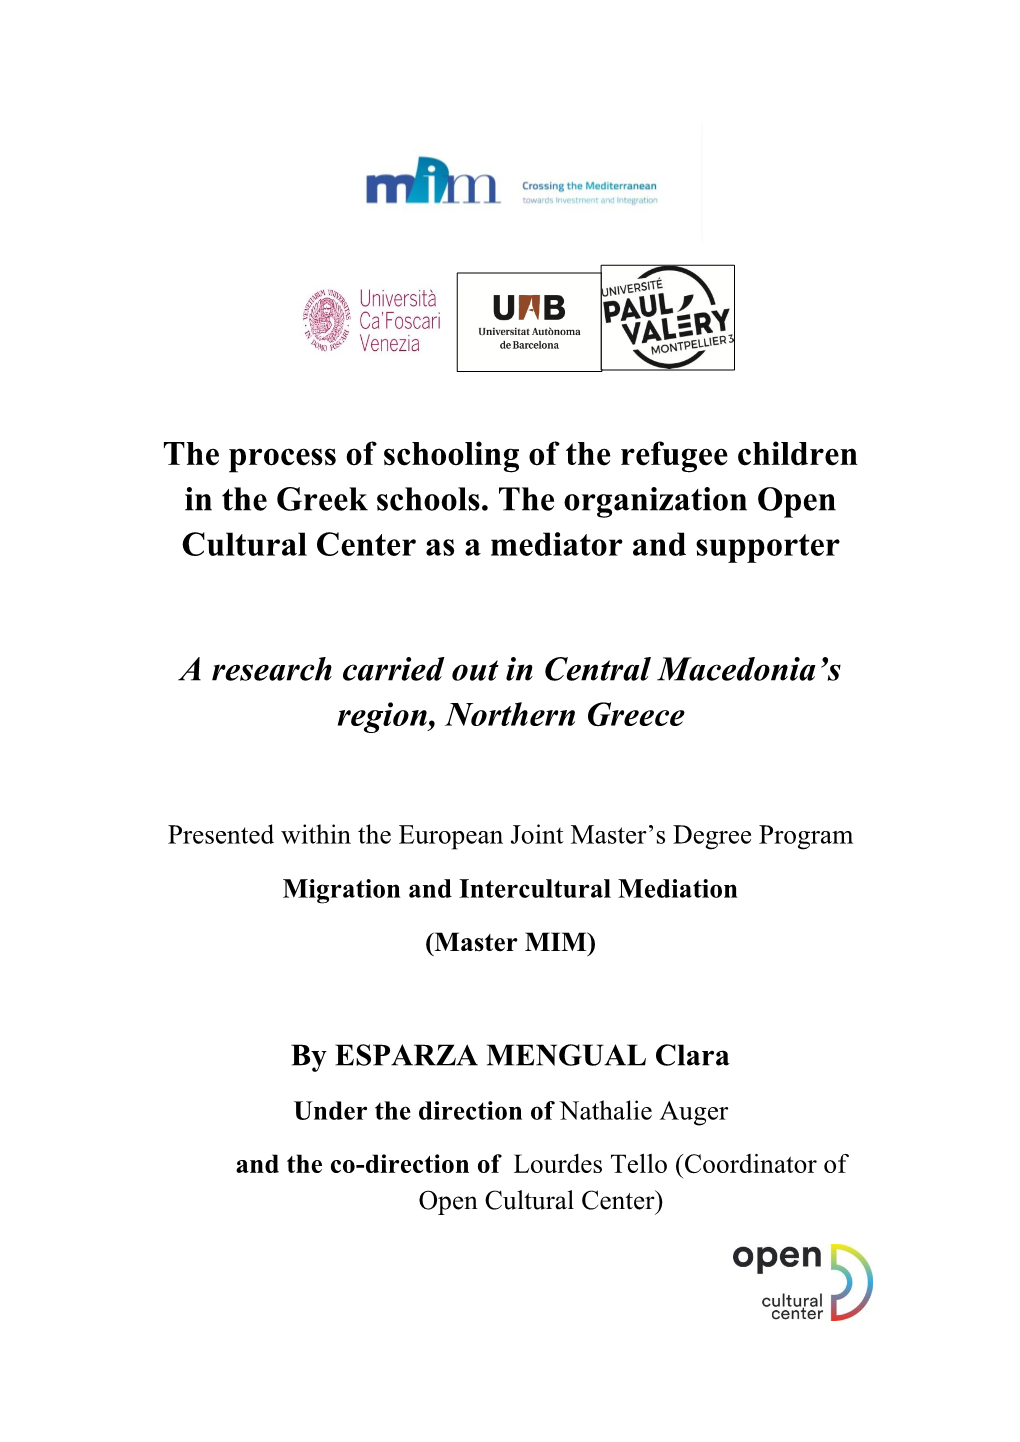 The Process of Schooling of the Refugee Children in the Greek Schools. the Organization Open Cultural Center As a Mediator and Supporter